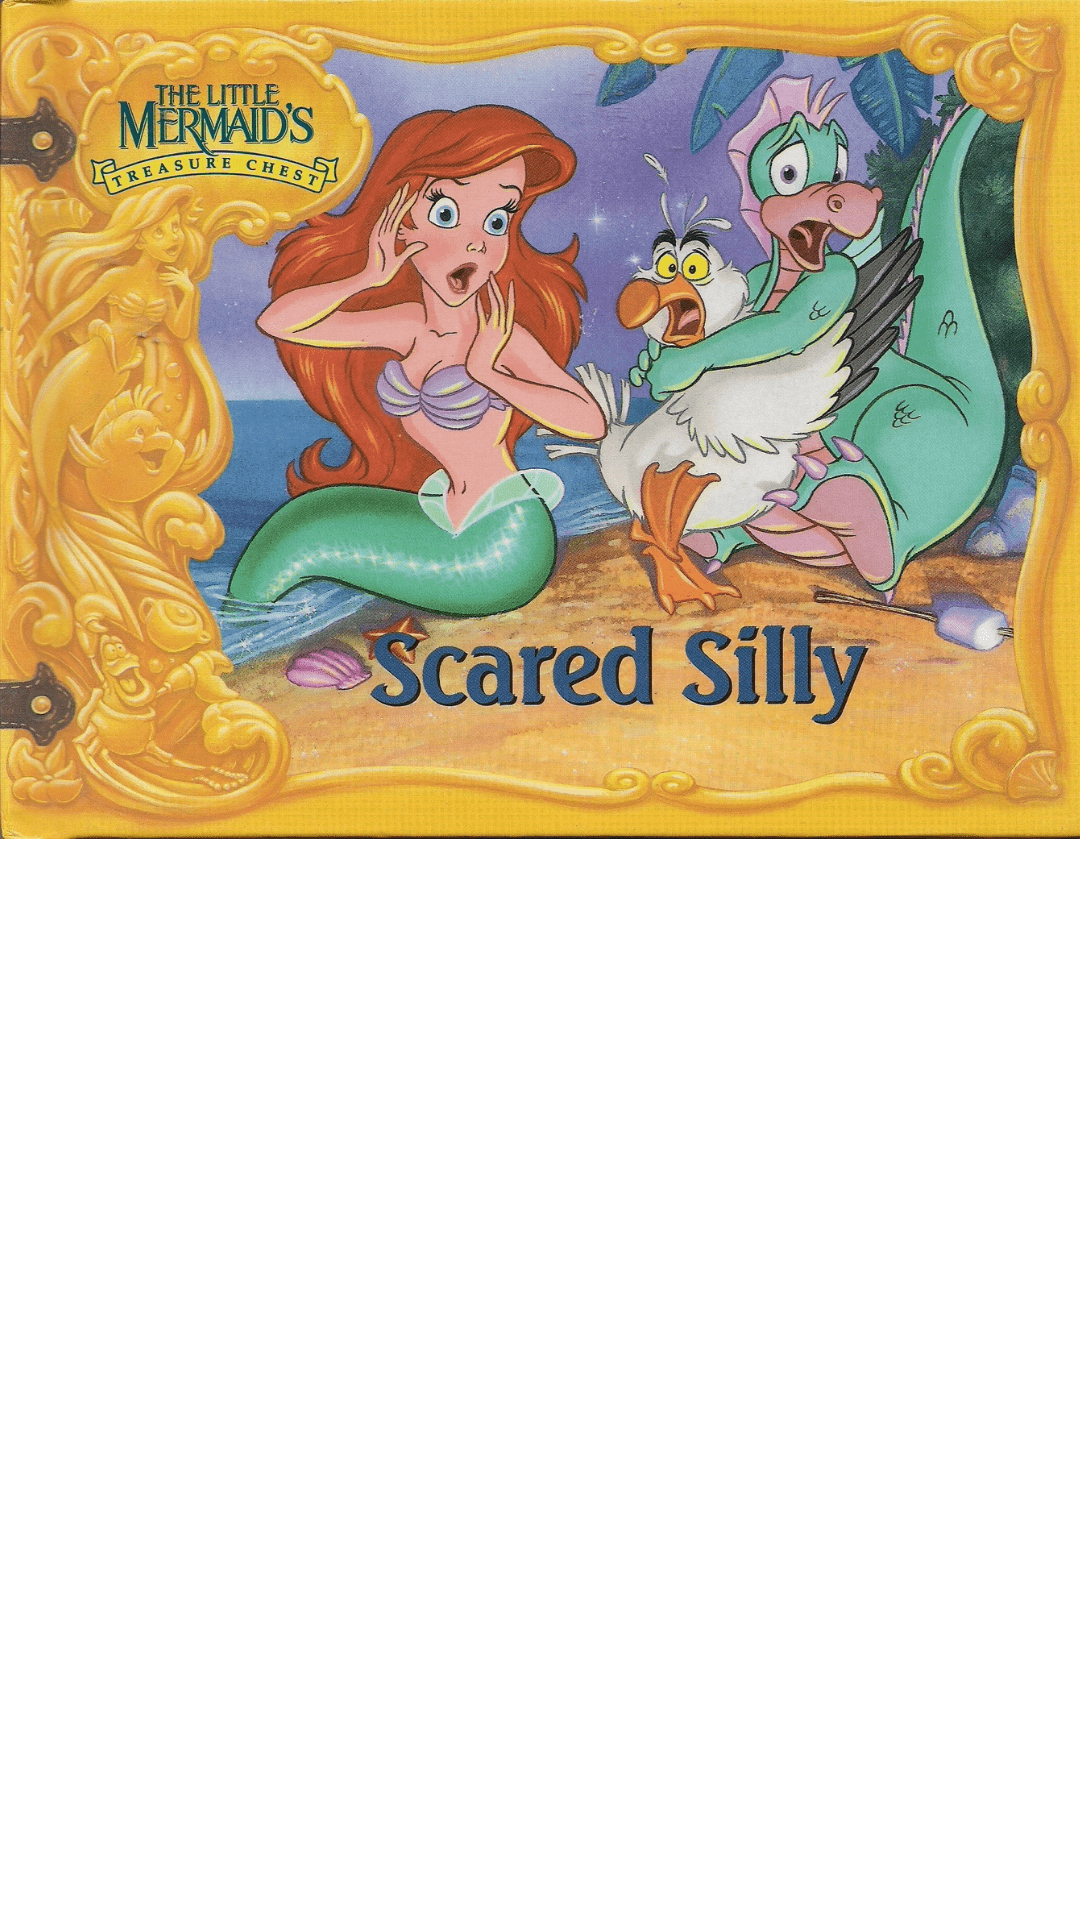 The Little Mermaid's Treasure Chest: Scared Silly